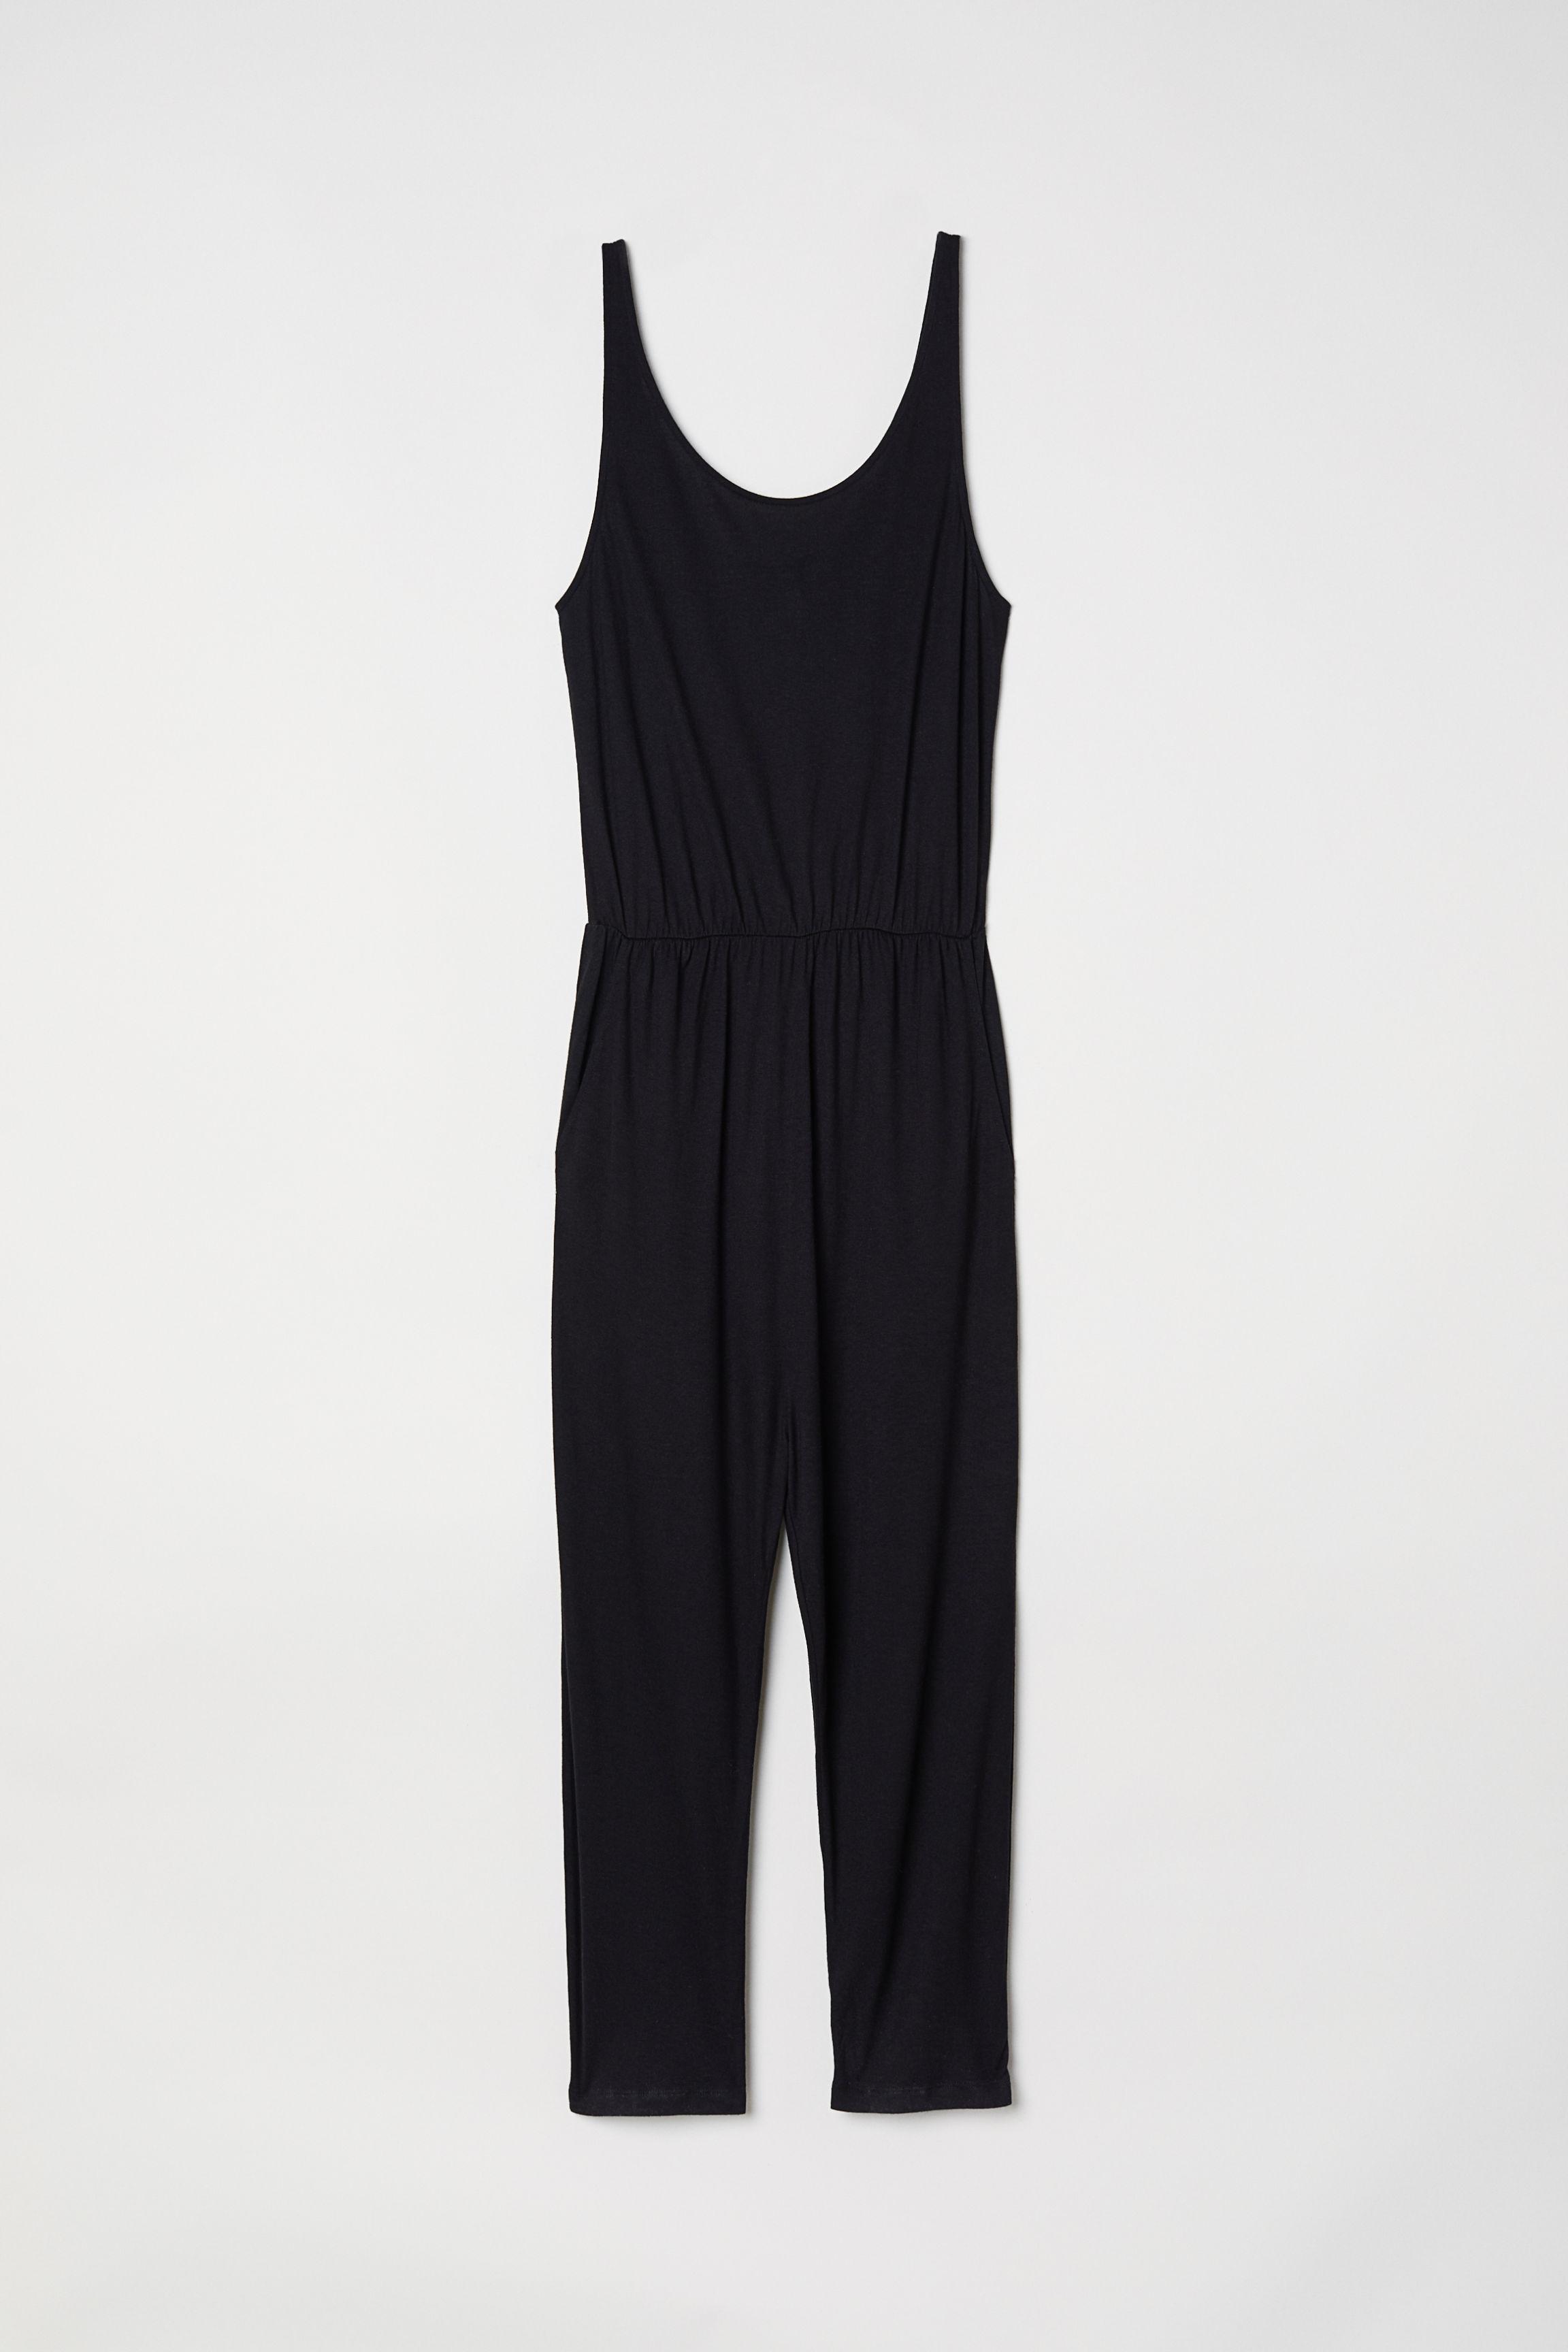 H&M Synthetic Sleeveless Jumpsuit in Black - Lyst